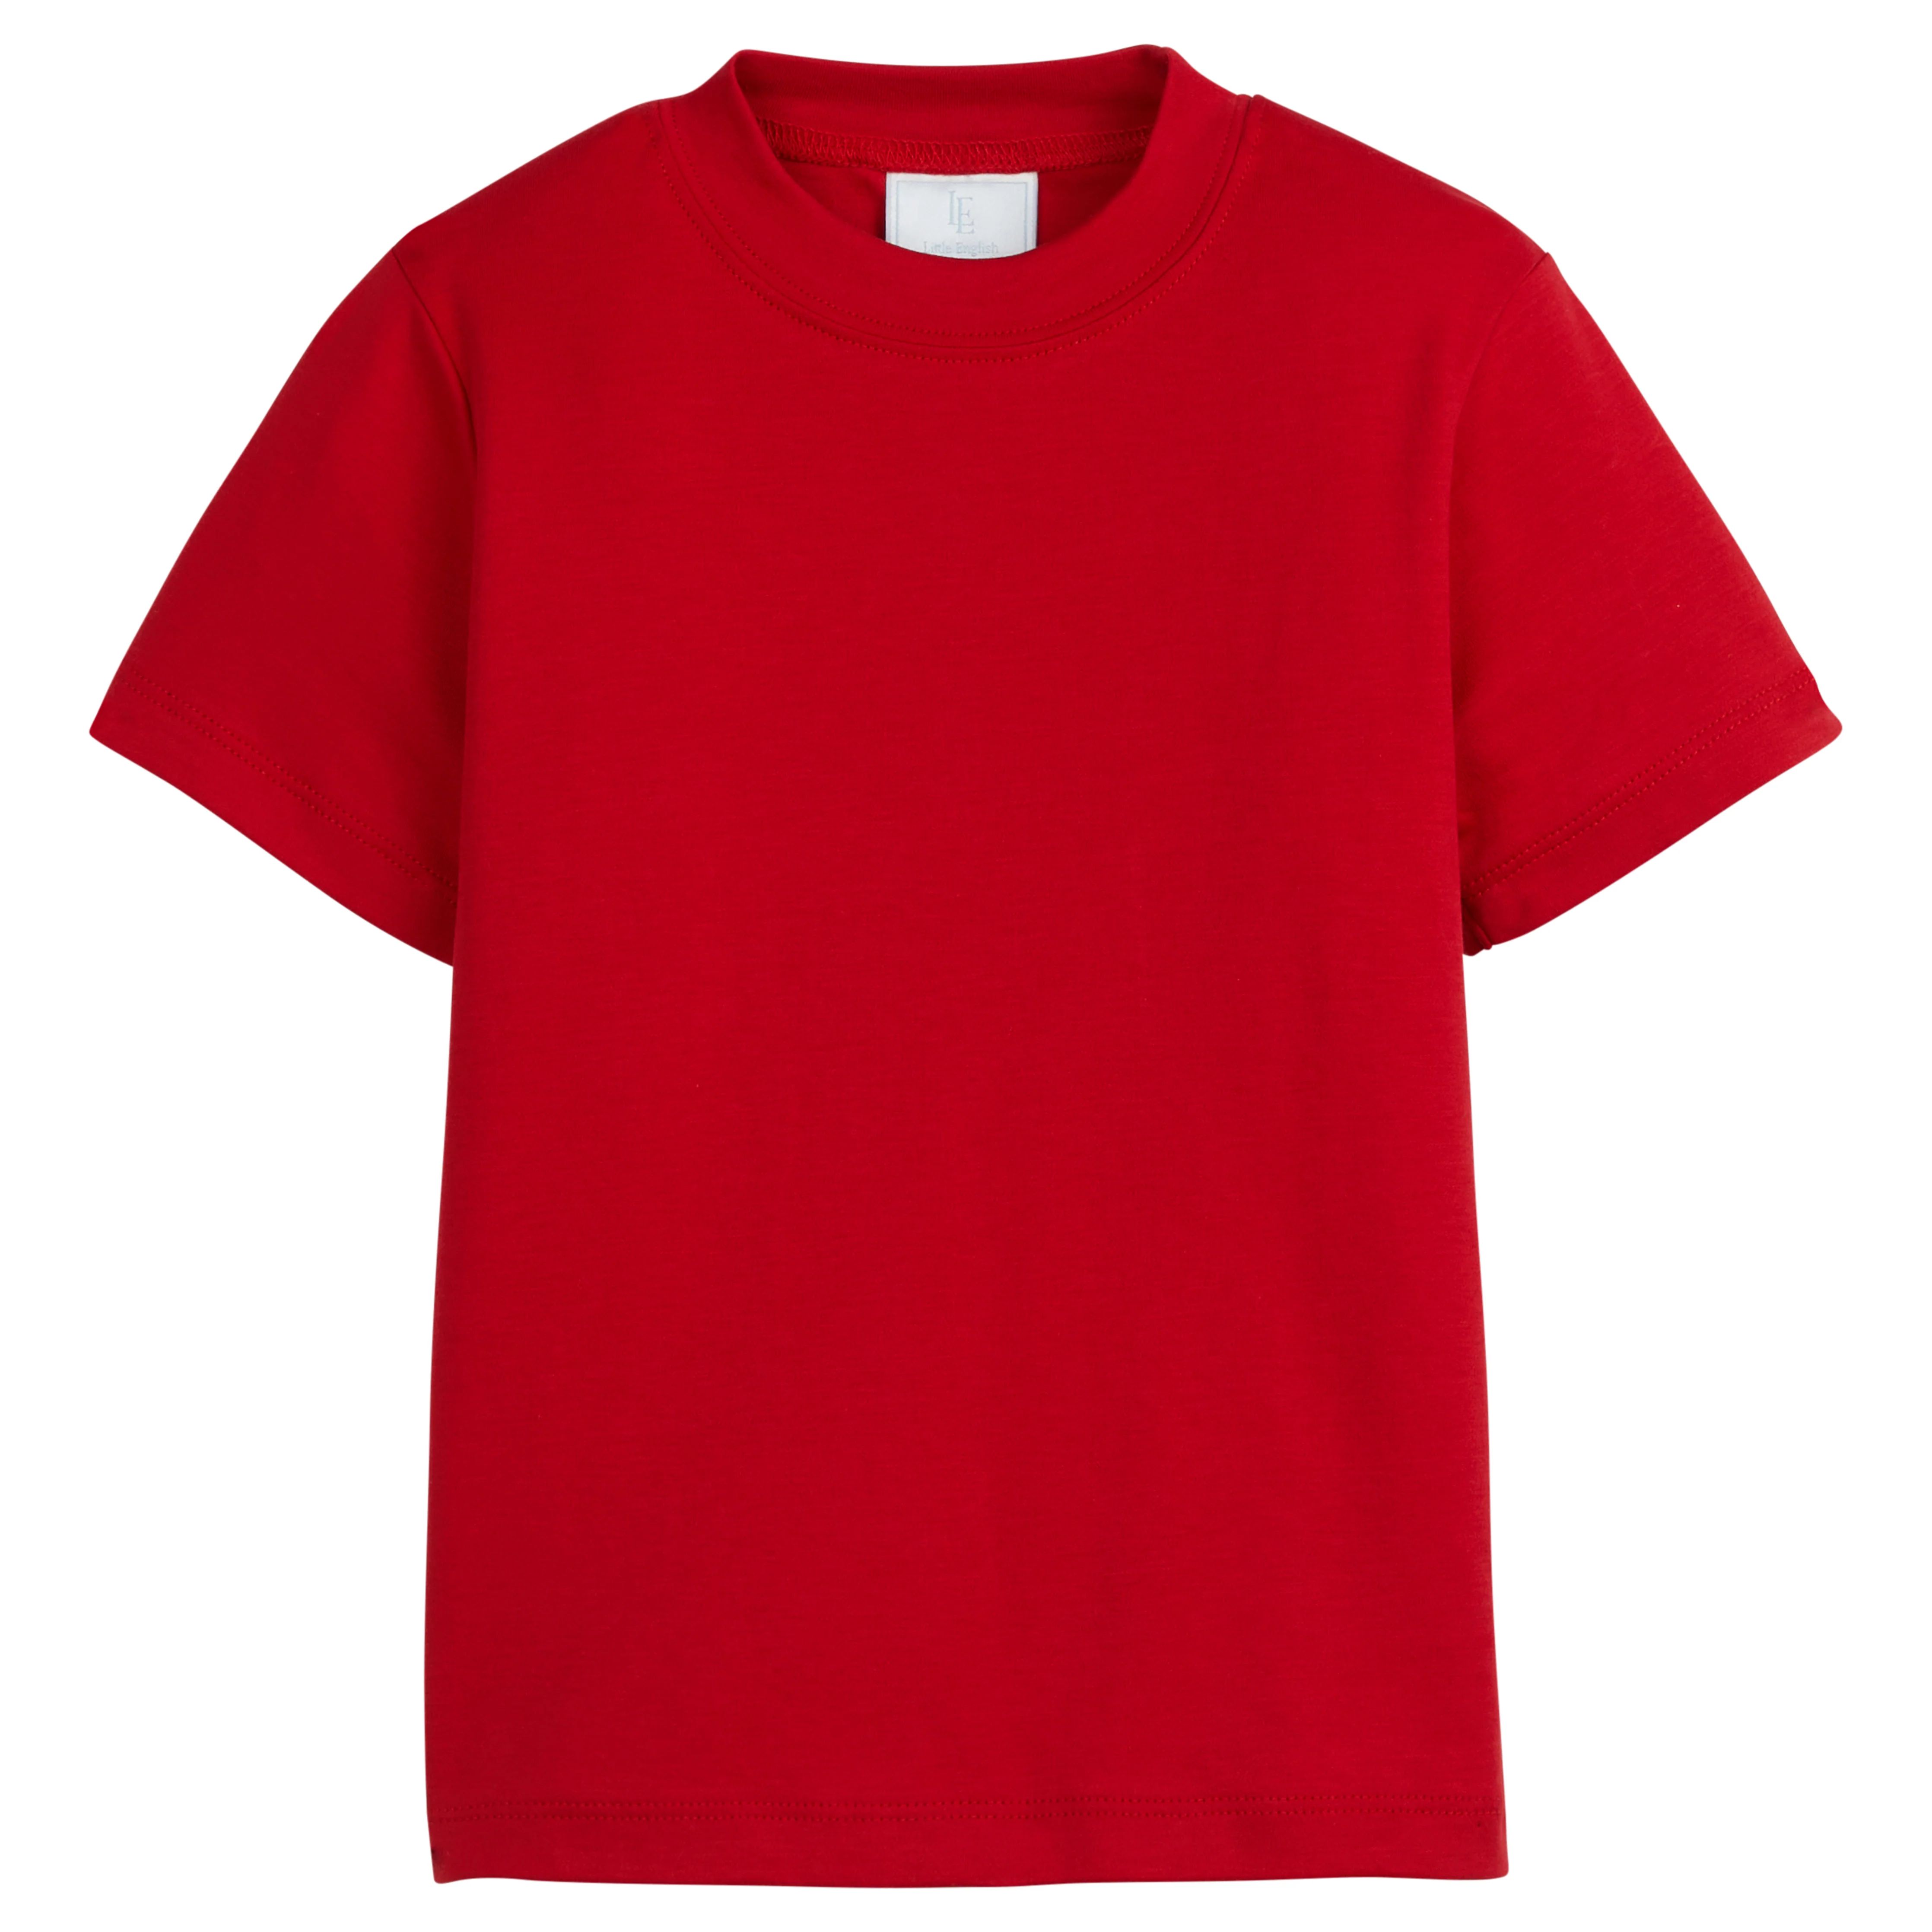 Toddler's Classic Red Tee - Little Boy's T Shirt | Little English